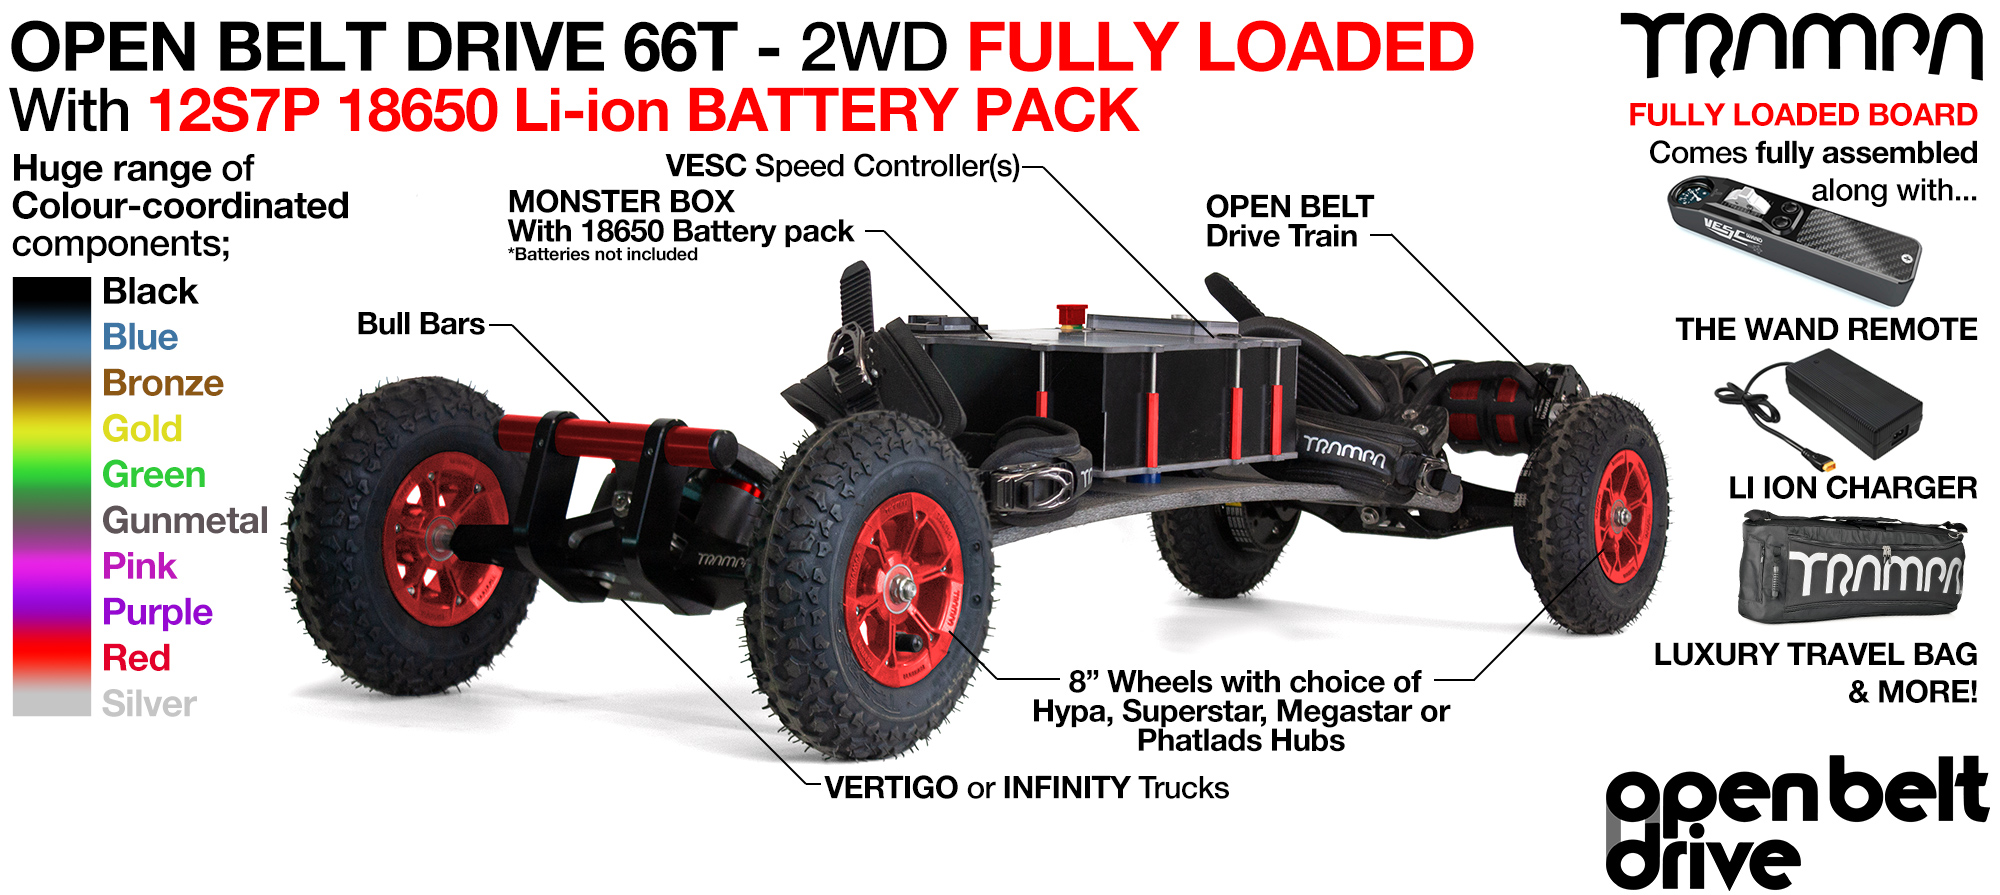 2WD 66T Open Belt Drive TRAMPA Electric Mountainboard with 8 Inch Wheels & 66 Tooth Pulleys - FULLY LOADED 18650 CELL Pack